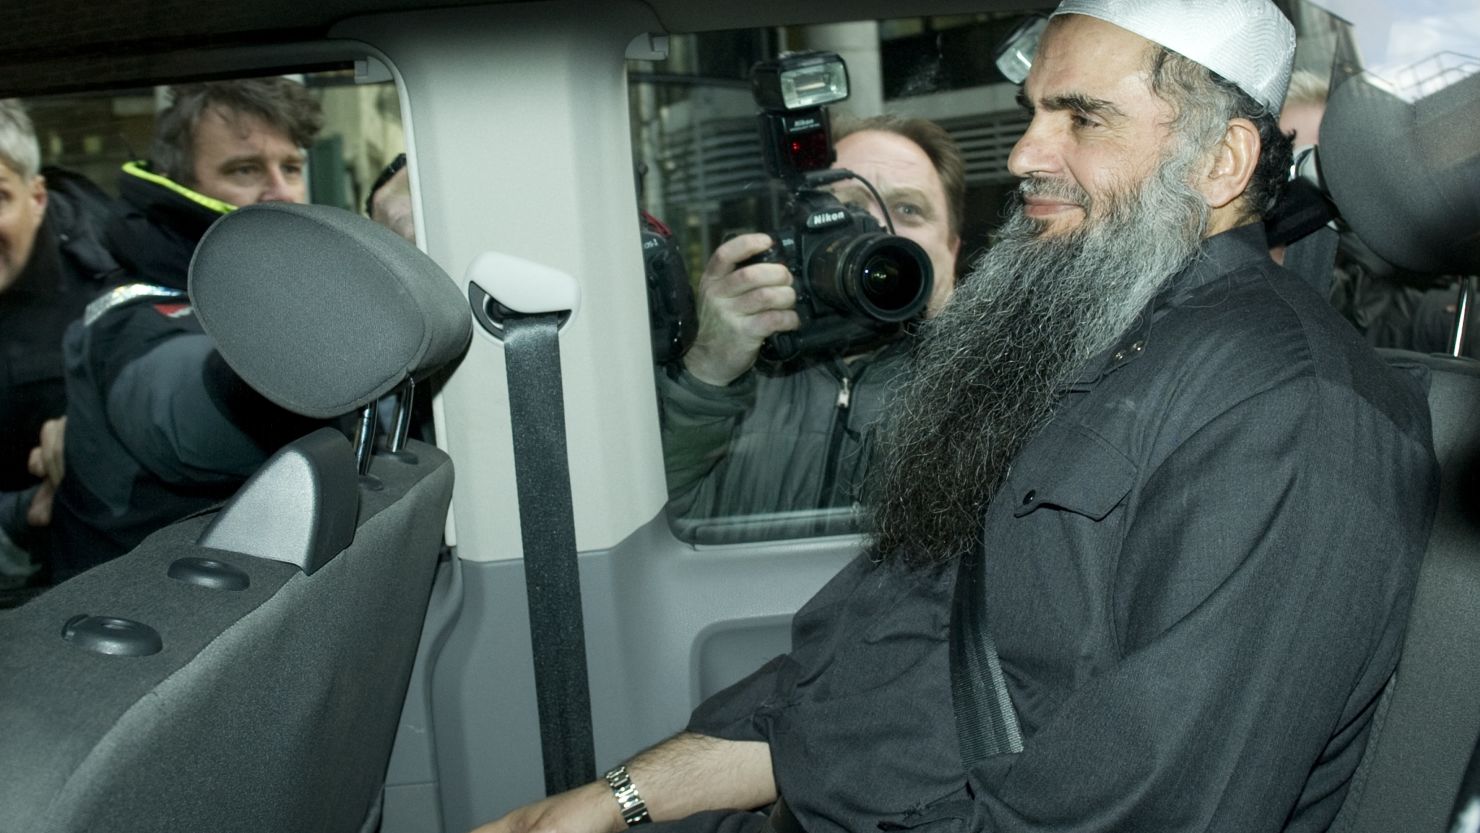 Britain has been trying to deport Abu Qatada for years, but his legal appeals have kept him in the United Kingdom.